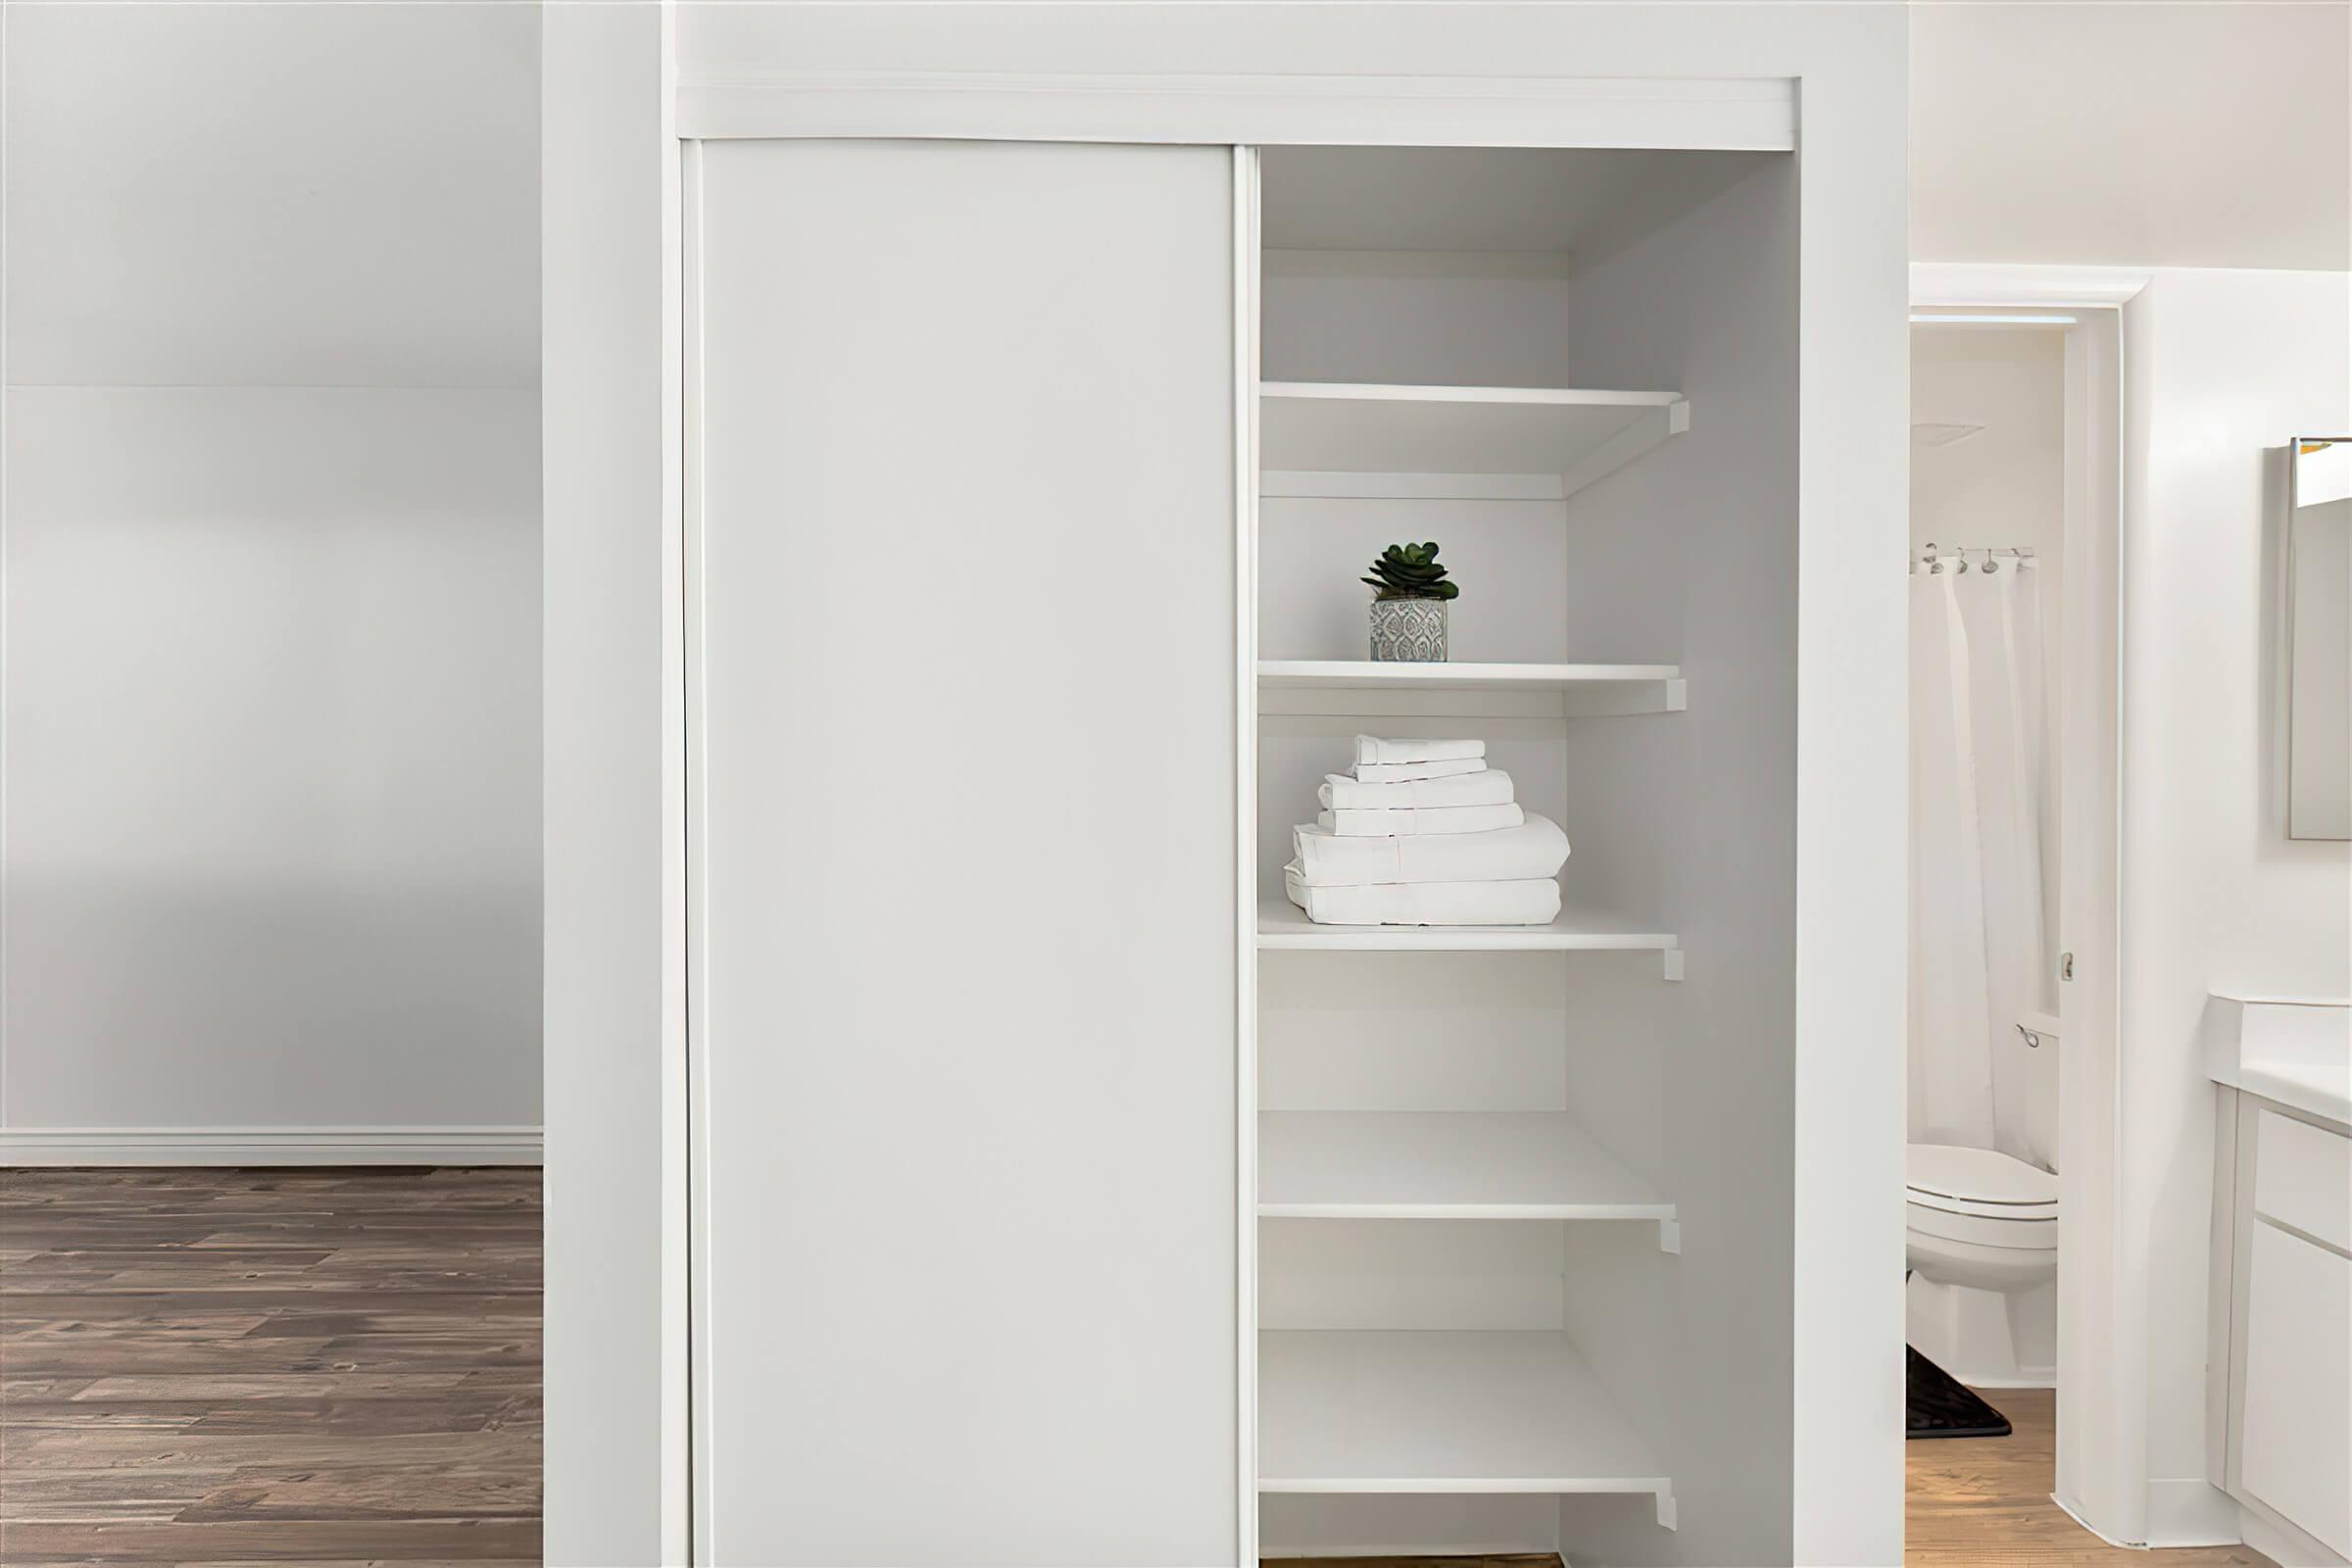 Closet storage space with built in shelving